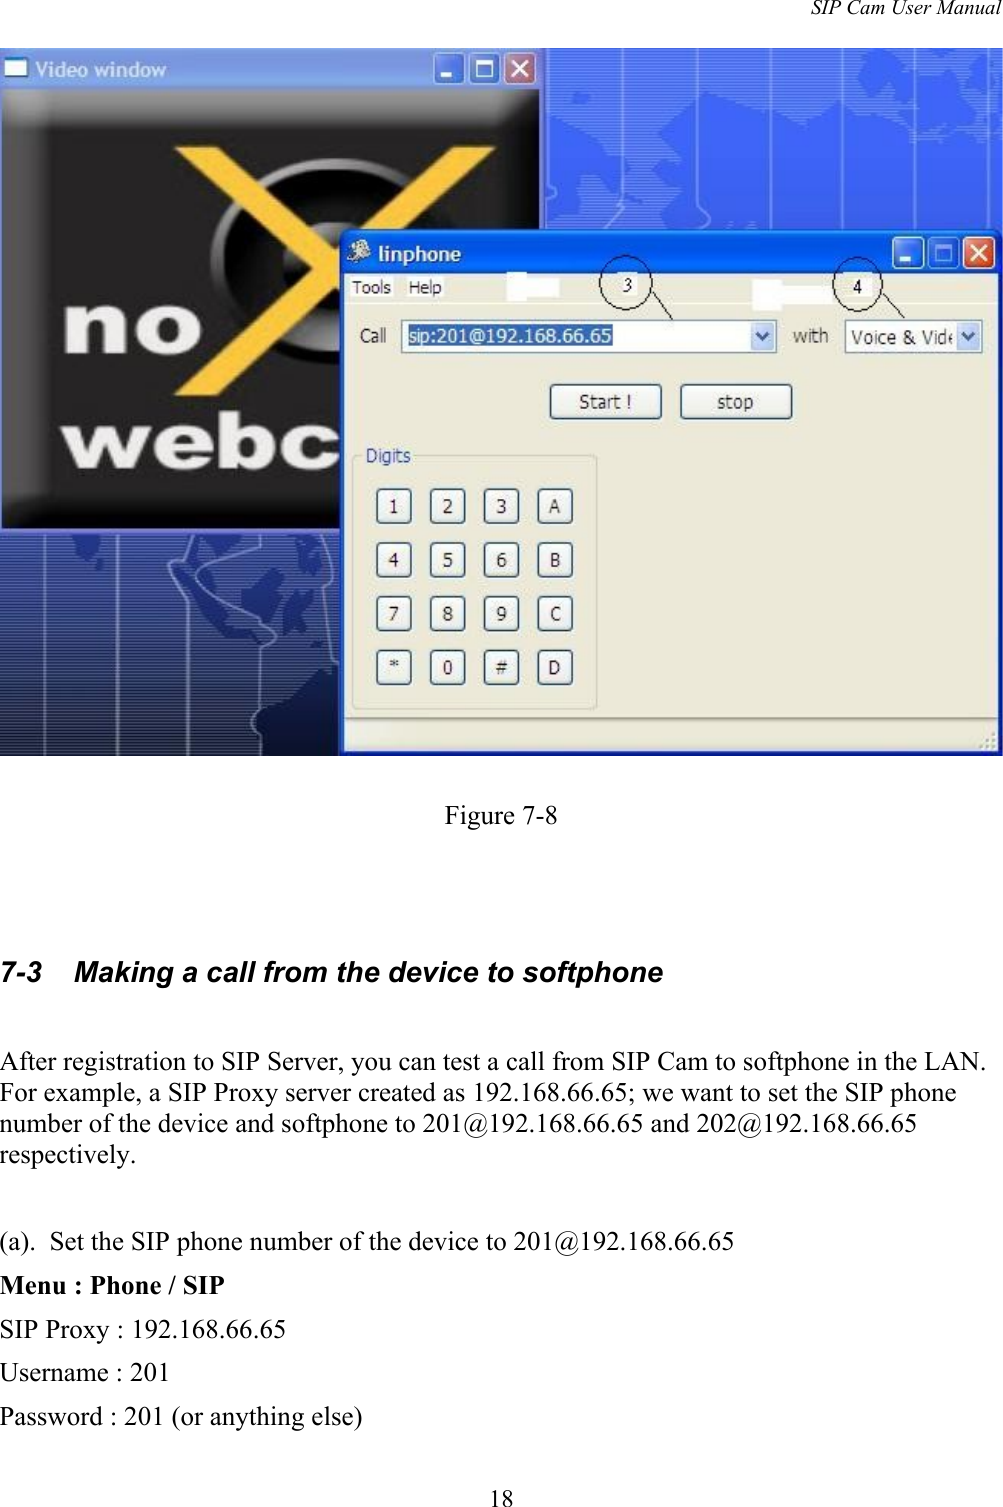 SIP Cam User ManualFigure 7-87-3  Making a call from the device to softphoneAfter registration to SIP Server, you can test a call from SIP Cam to softphone in the LAN. For example, a SIP Proxy server created as 192.168.66.65; we want to set the SIP phone number of the device and softphone to 201@192.168.66.65 and 202@192.168.66.65 respectively.(a).  Set the SIP phone number of the device to 201@192.168.66.65Menu : Phone / SIPSIP Proxy : 192.168.66.65Username : 201Password : 201 (or anything else)18